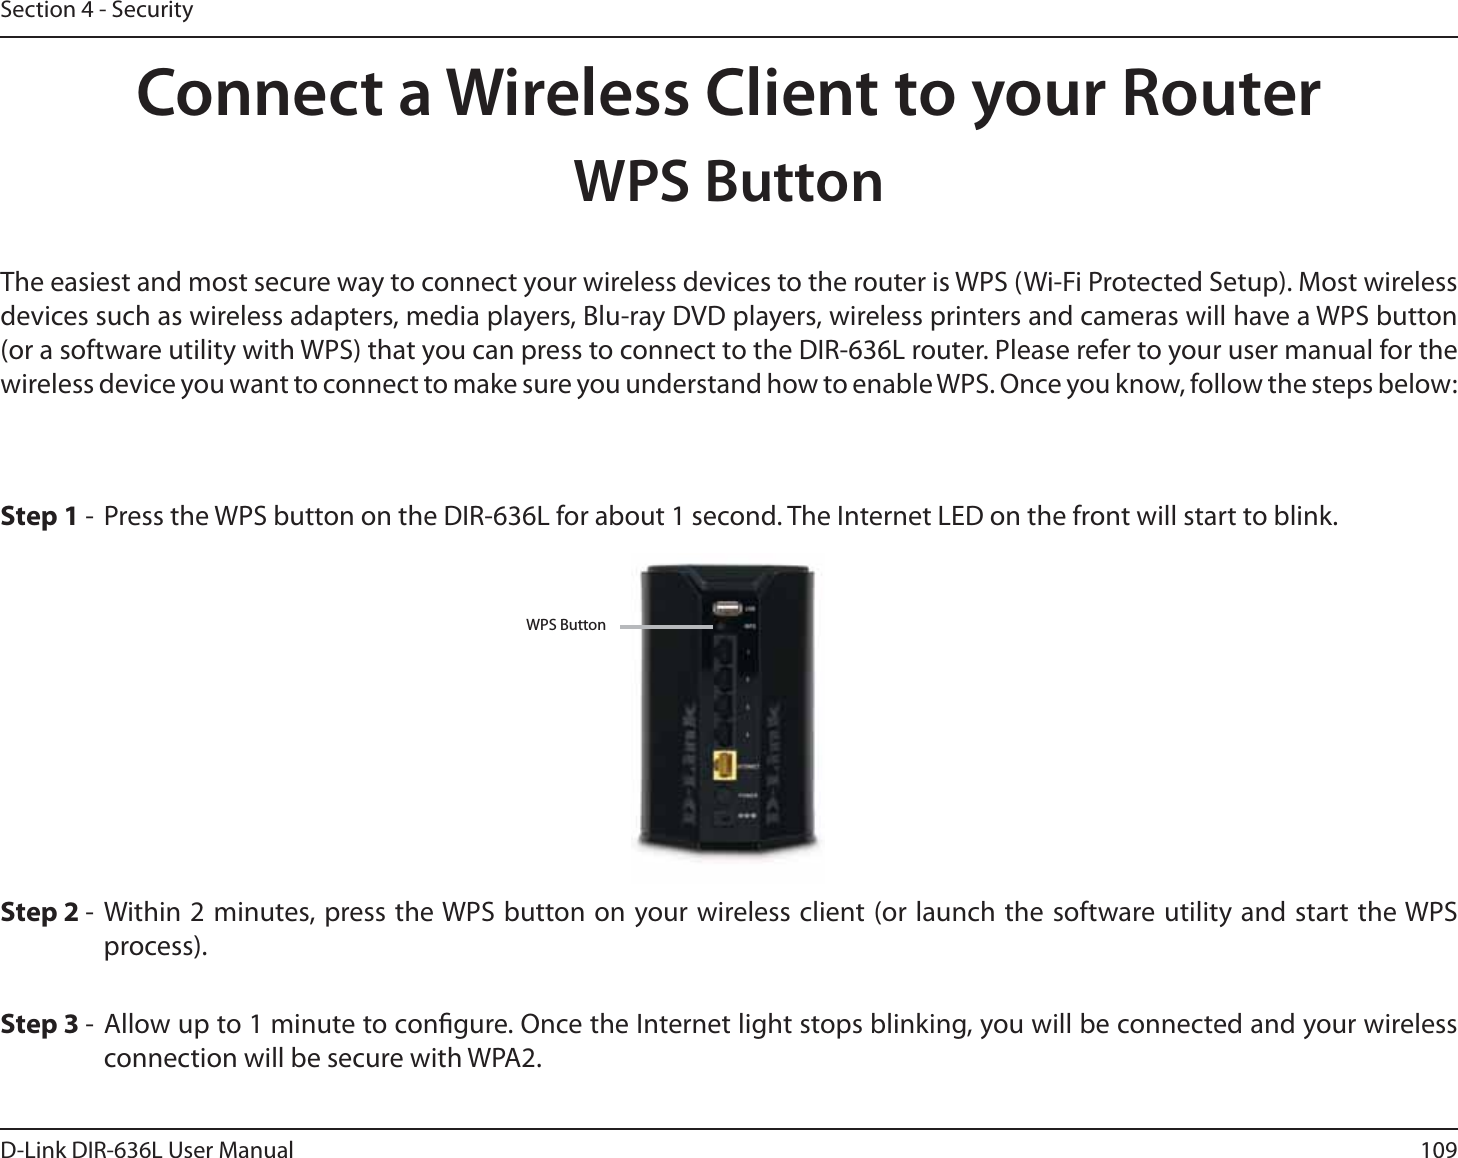 109D-Link DIR-636L User ManualSection 4 - SecurityConnect a Wireless Client to your RouterWPS ButtonStep 2 - Within 2 minutes, press the WPS button on your wireless client (or launch the software utility and start the WPS process).The easiest and most secure way to connect your wireless devices to the router is WPS (Wi-Fi Protected Setup). Most wireless devices such as wireless adapters, media players, Blu-ray DVD players, wireless printers and cameras will have a WPS button (or a software utility with WPS) that you can press to connect to the DIR-636L router. Please refer to your user manual for the wireless device you want to connect to make sure you understand how to enable WPS. Once you know, follow the steps below:Step 1 -  Press the WPS button on the DIR-636L for about 1 second. The Internet LED on the front will start to blink.Step 3 - Allow up to 1 minute to congure. Once the Internet light stops blinking, you will be connected and your wireless connection will be secure with WPA2.WPS Button